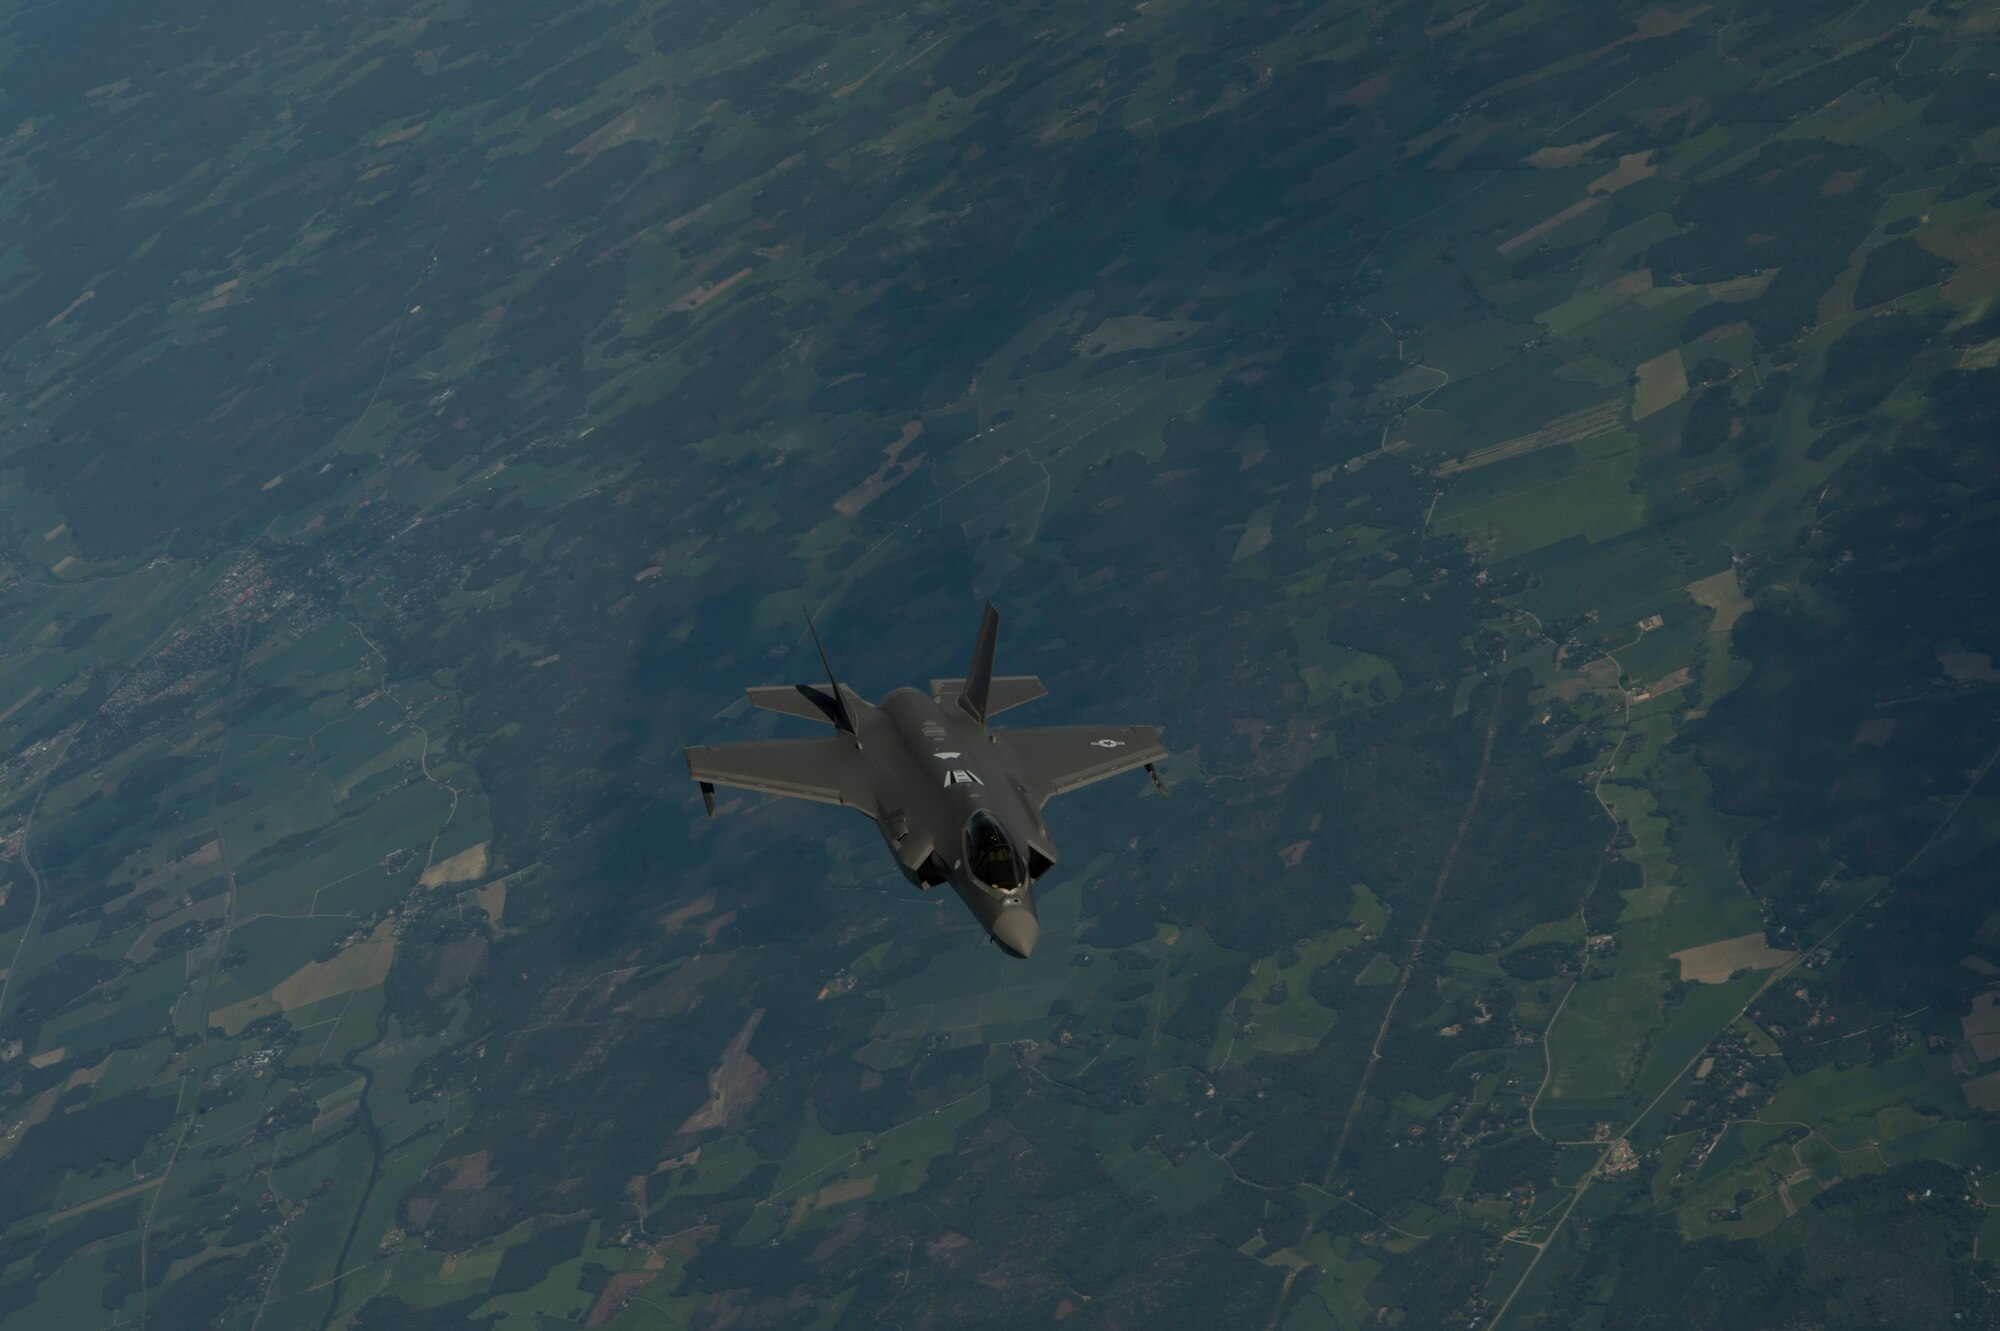 The F-35A flew alongside two Finnish F-18 Hornet aircraft as part of a Theater Security Package.